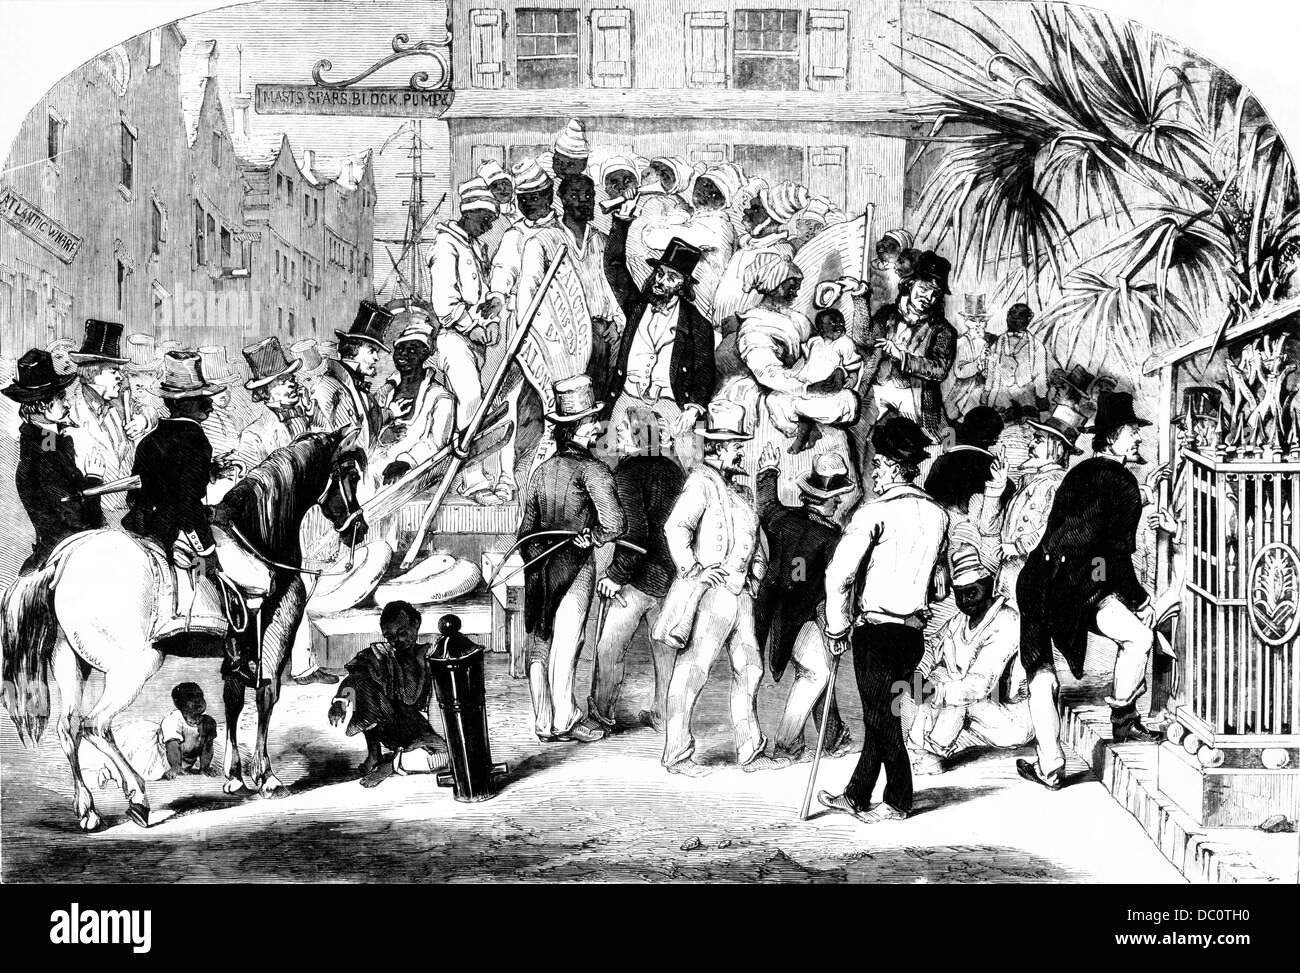 1700s 1850s 1856 SKETCH OF SLAVE SALE IN CHARLESTON SOUTH CAROLINA DRAWING BY EYRE CROWE Stock Photo